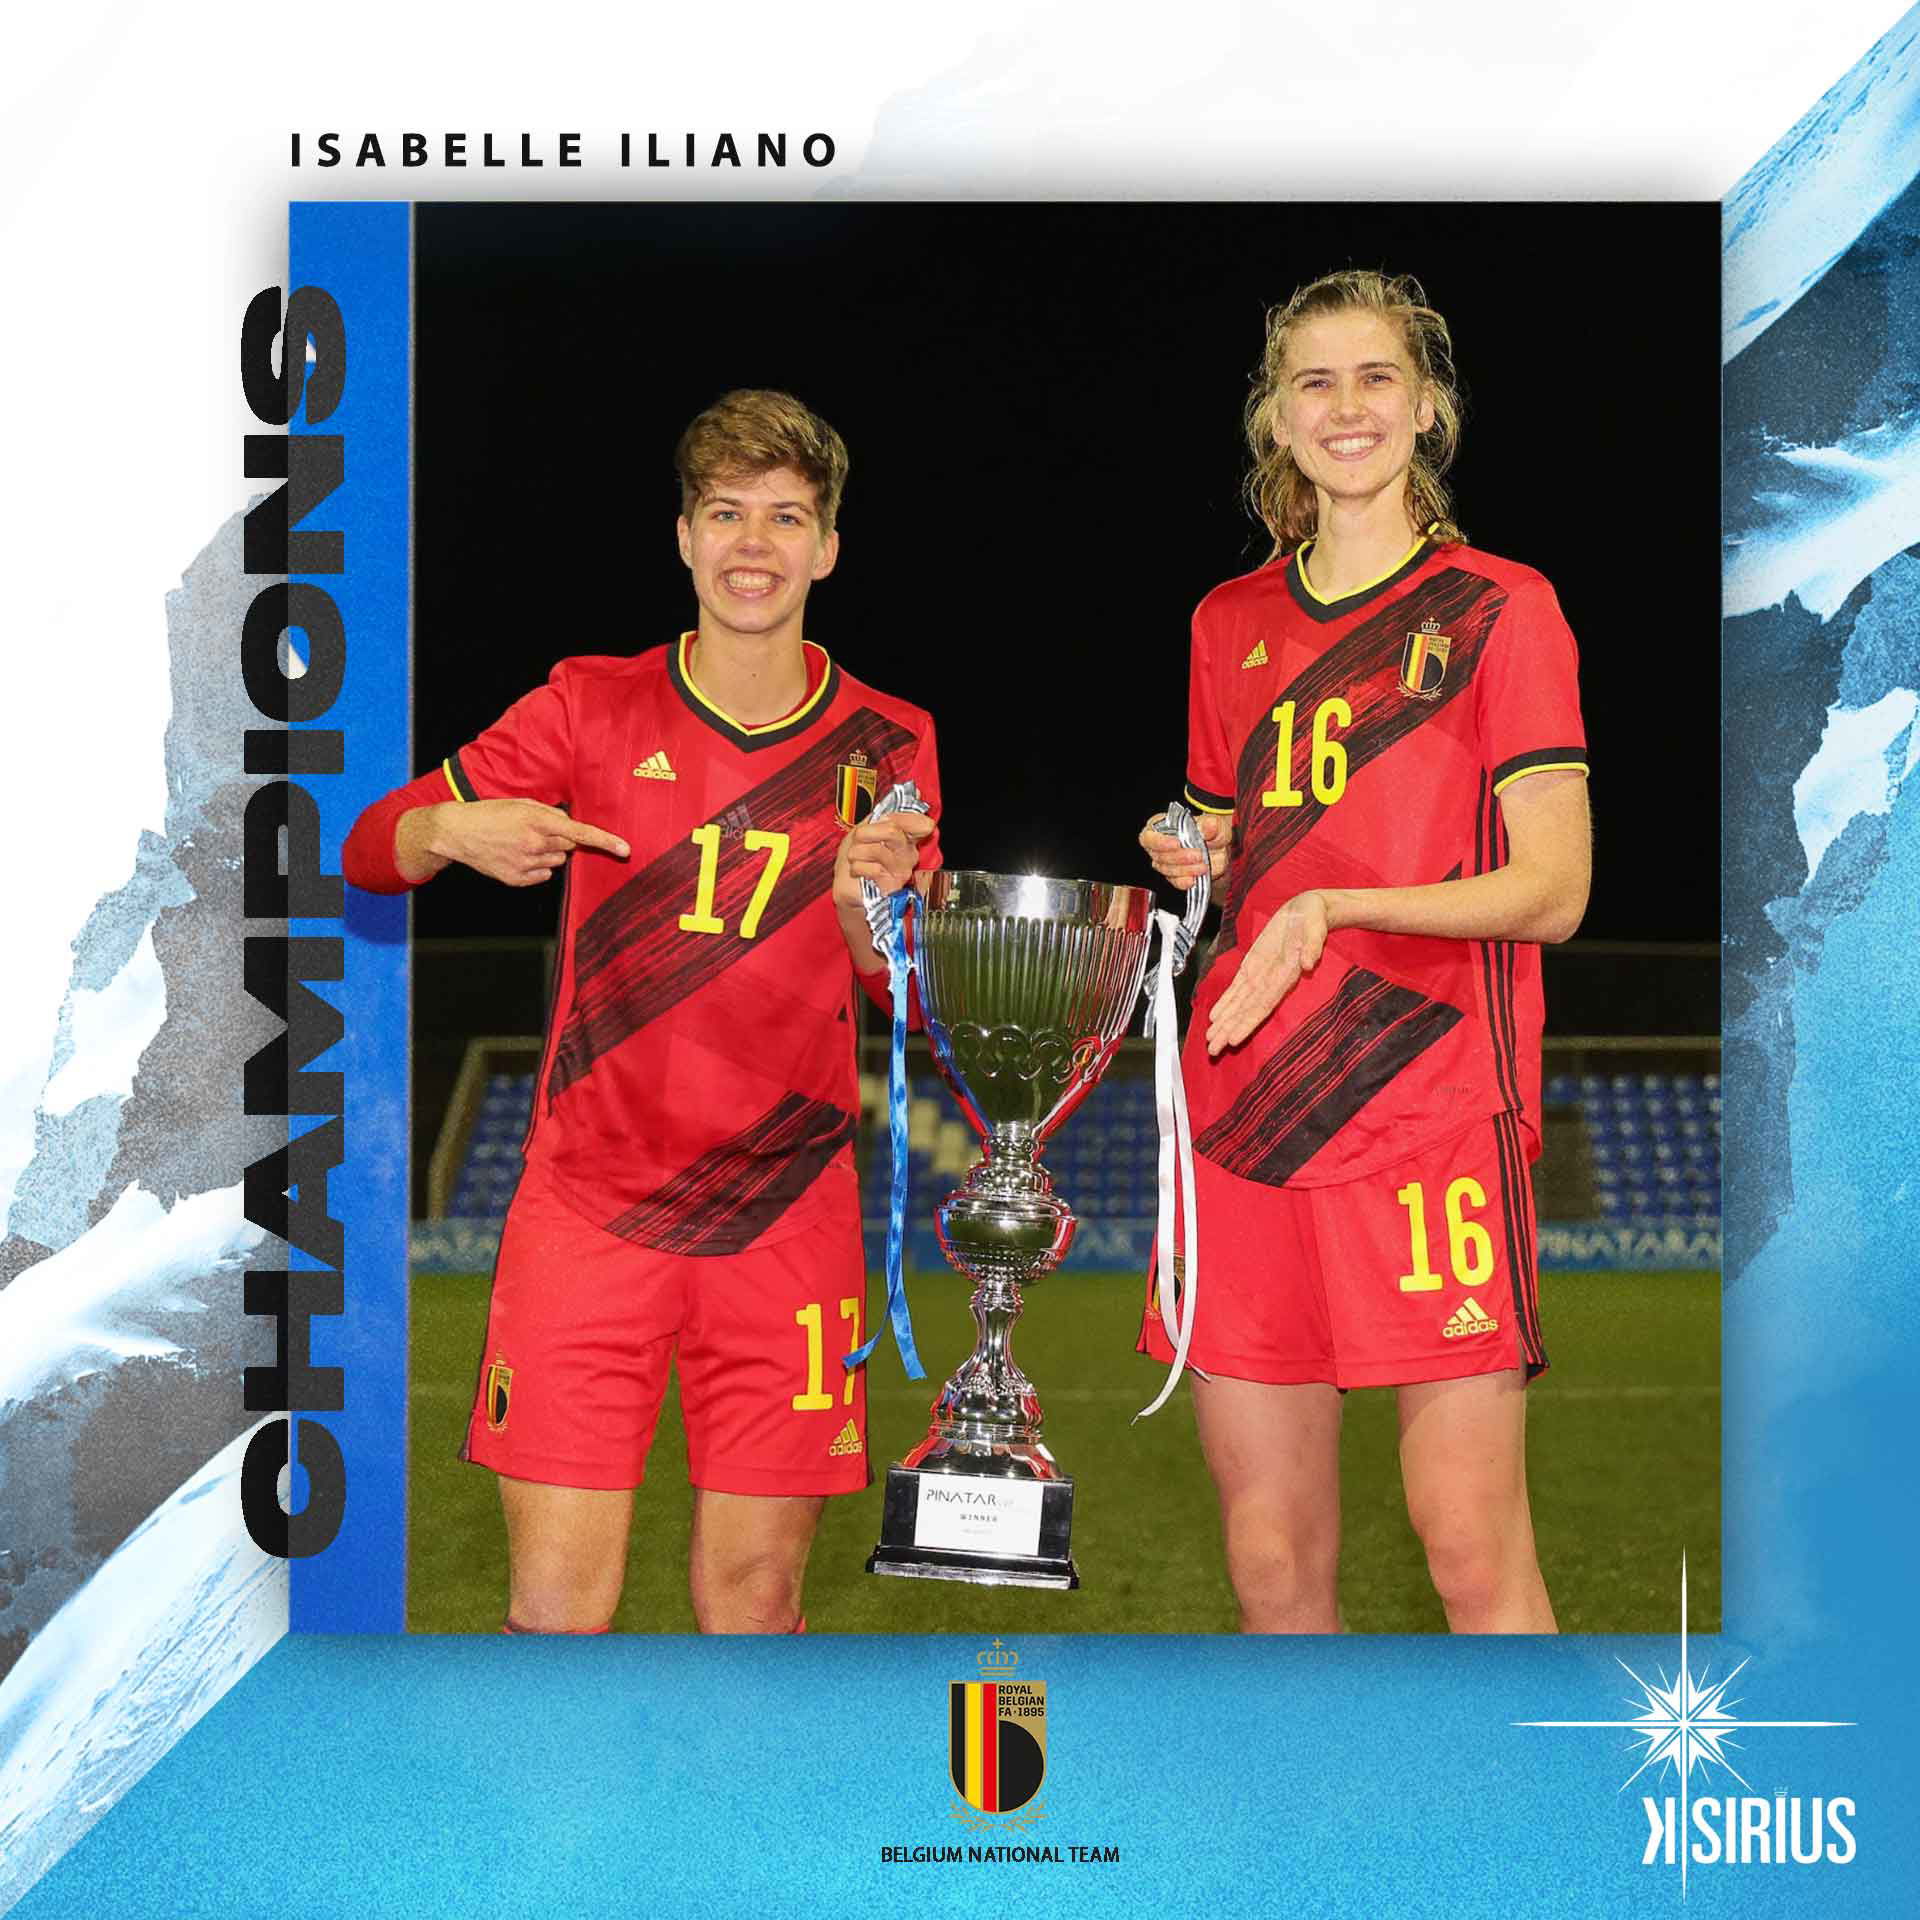 Pinatar Cup 2022: Isabelle Iliano (Belgium National Team)